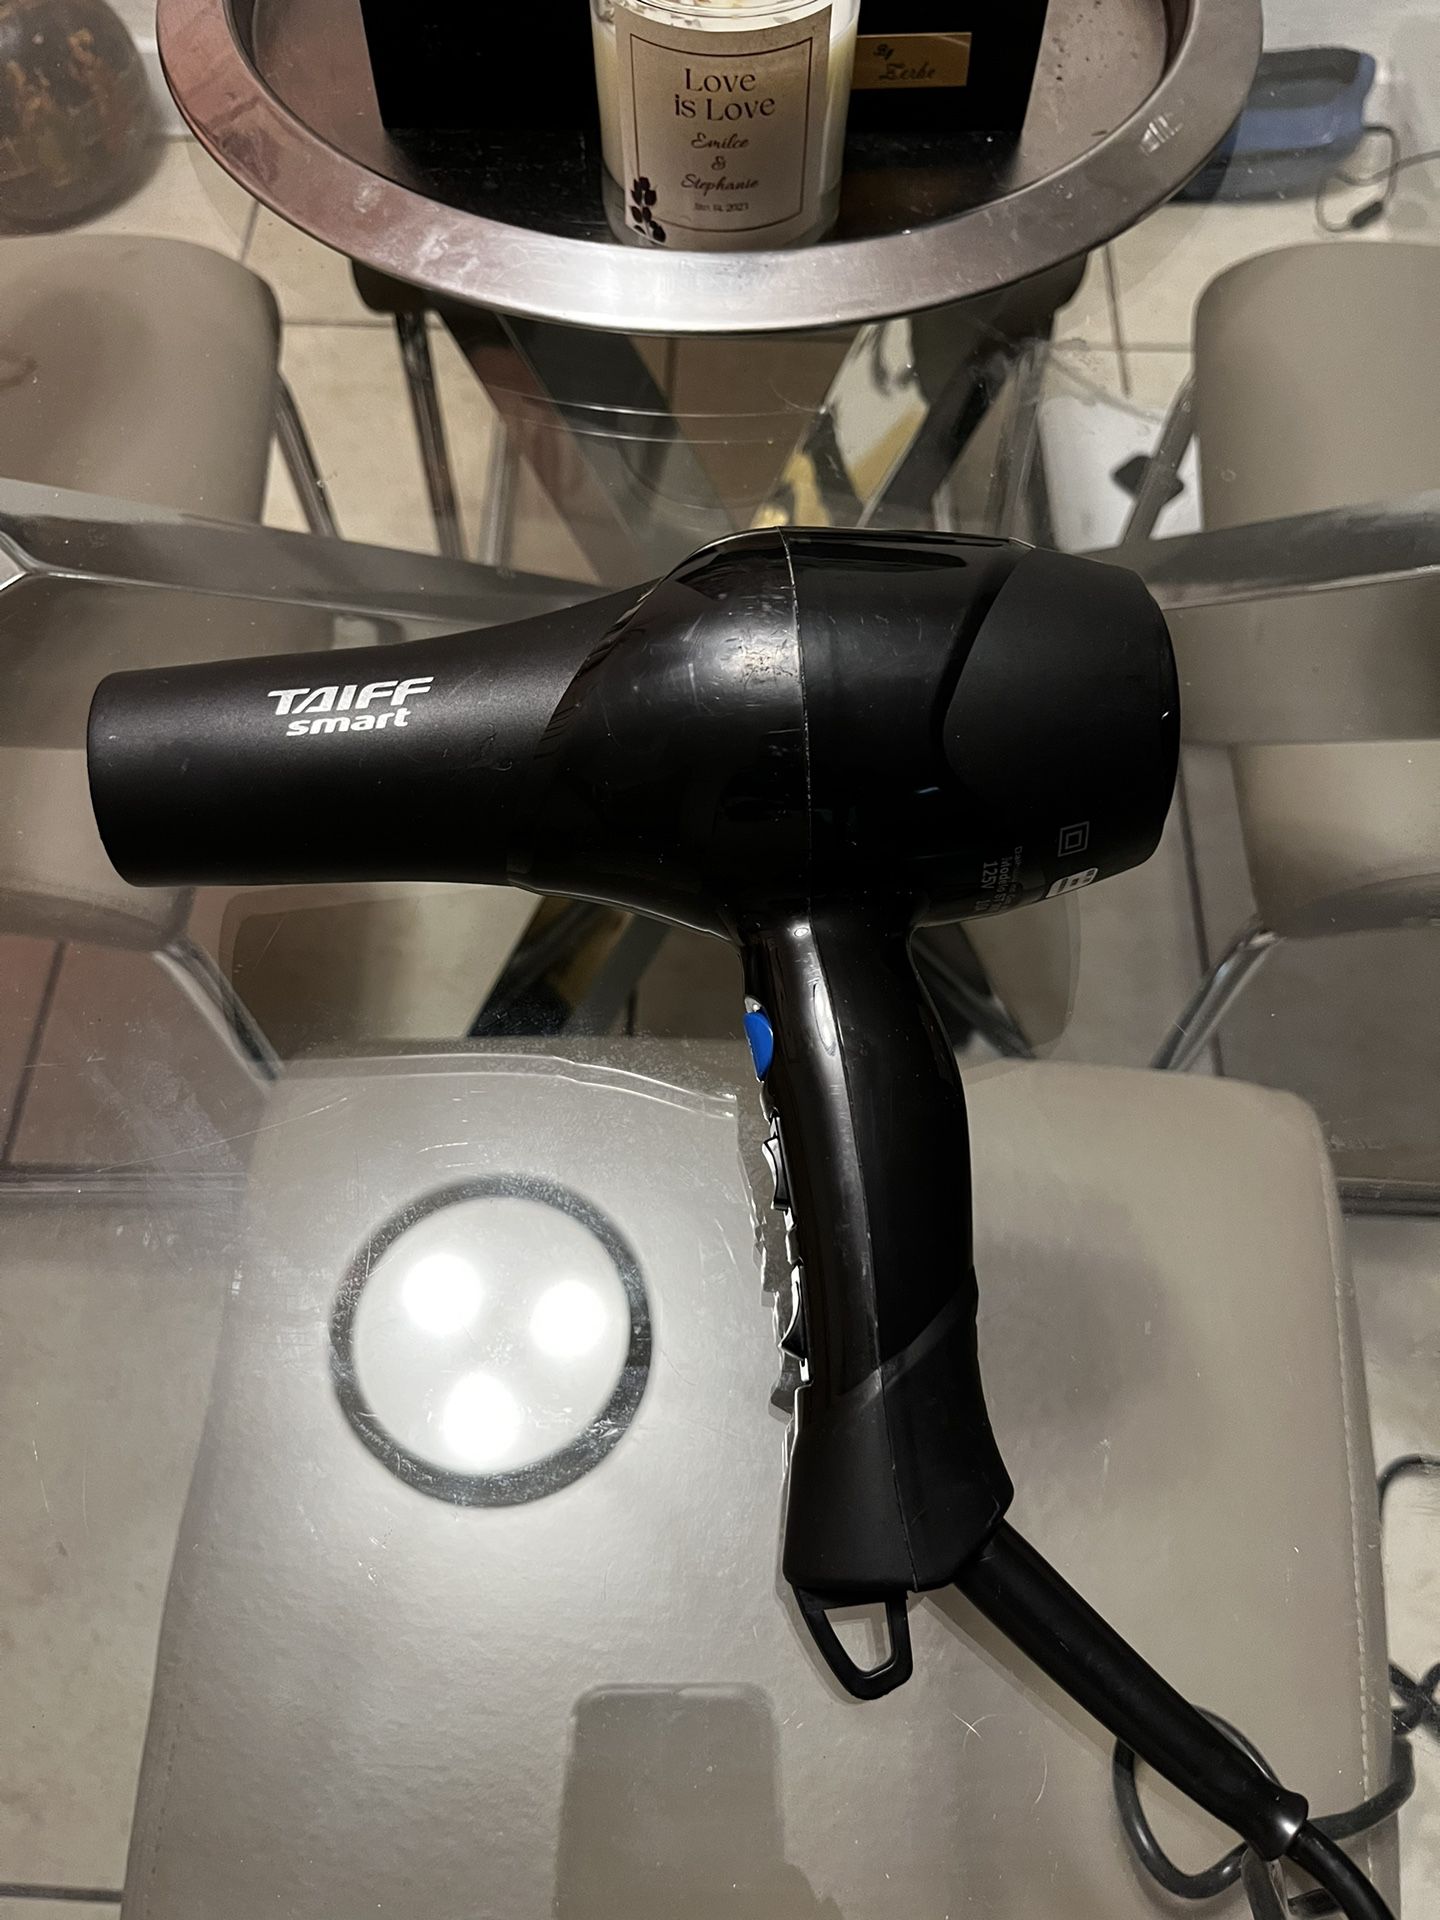 Taiff Smart Blow Dryer W/ Accessories $75 OBO/ Delivery Available 